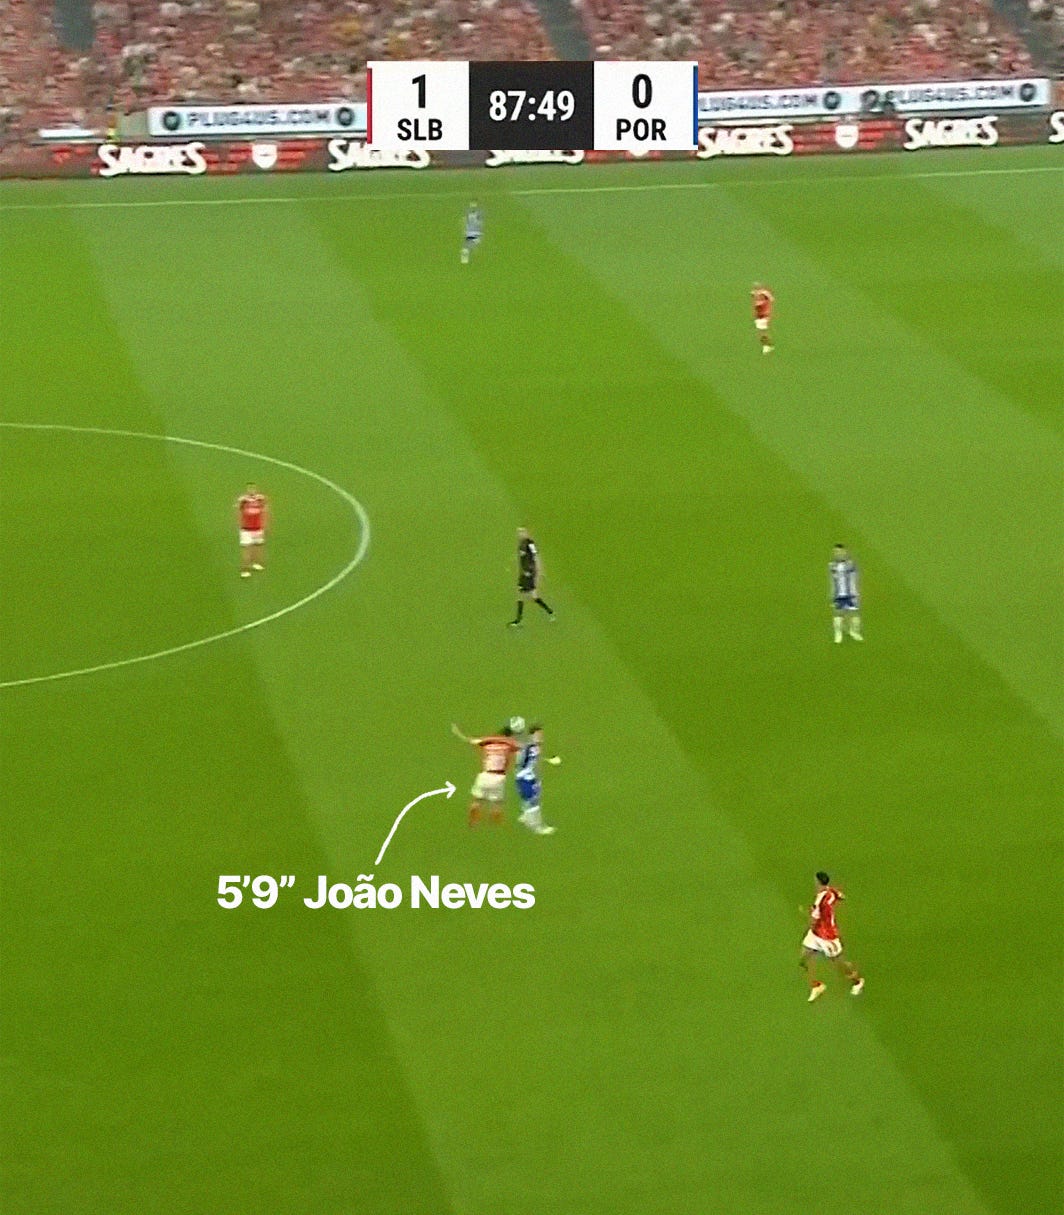 A screenshot of 5'9" João Neves winning a booming header in the final minutes of Benfica's 1-0 win against Porto